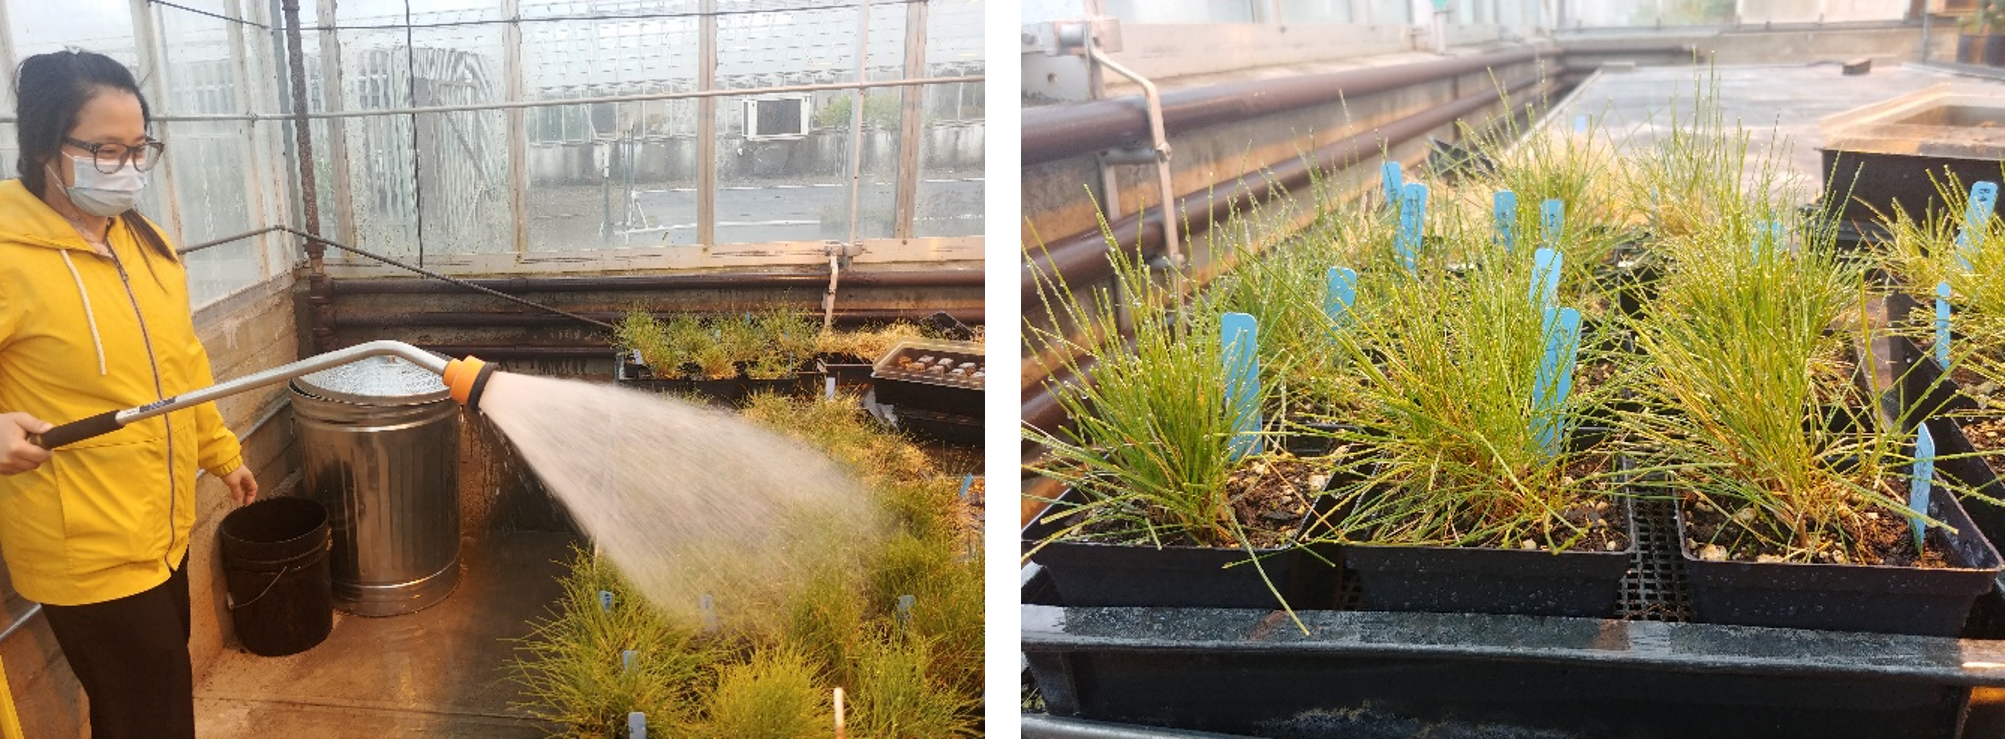 A woman spraying plants in a greenhouse and a closeup of the turgrass plants on their bench in the greenhouse